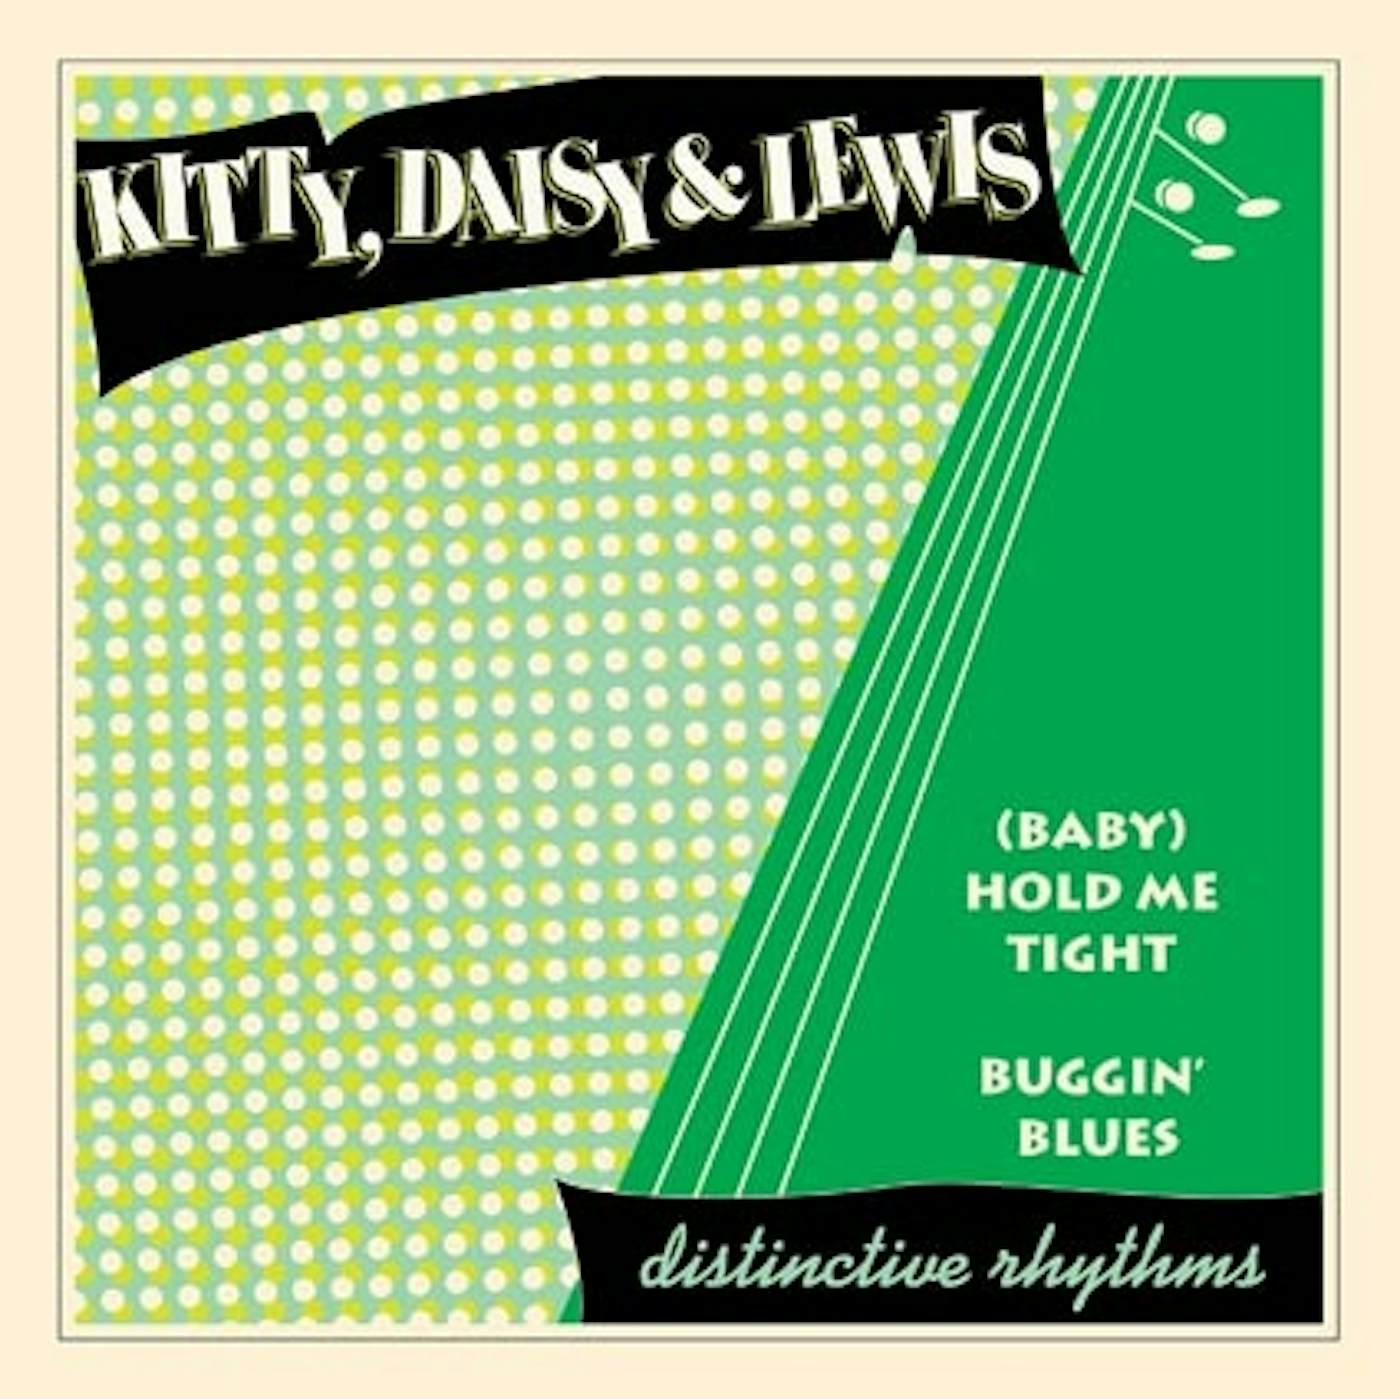 Kitty, Daisy & Lewis (BABY) HOLD ME TIGHT/BUGGIN' BLUES Vinyl Record - UK Release